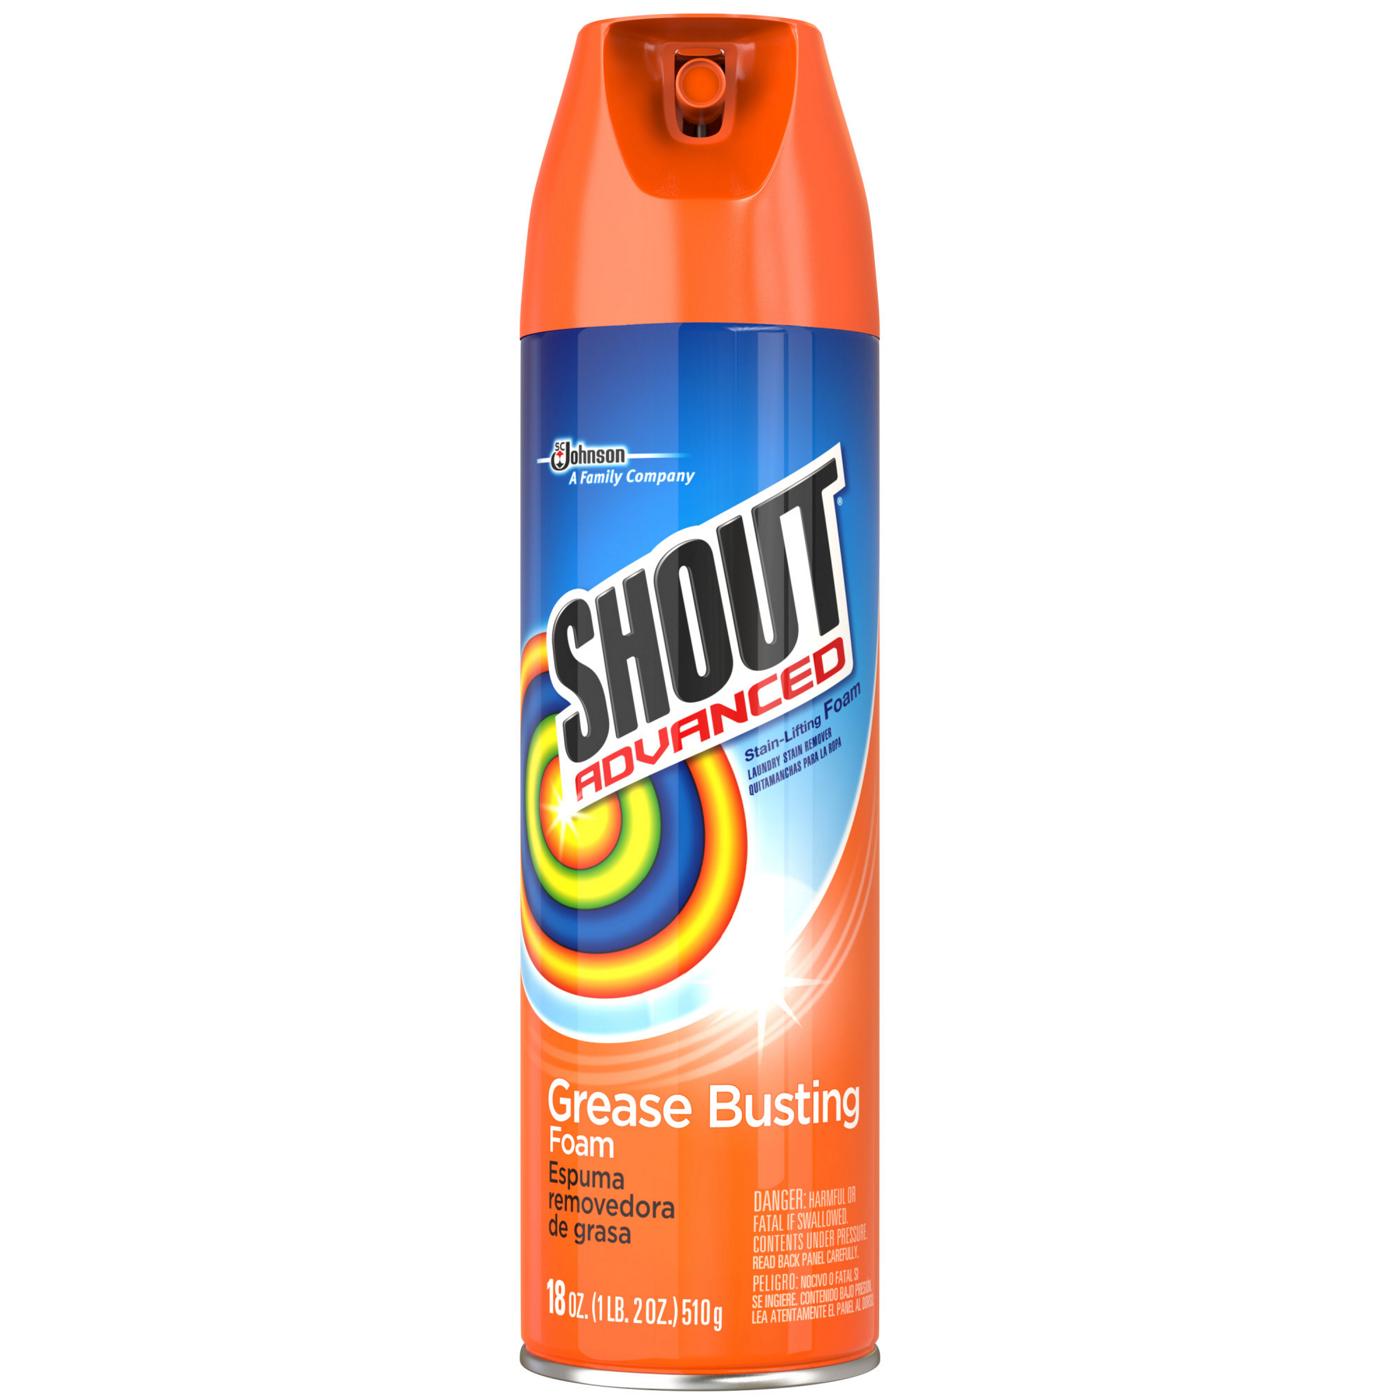 Shout Advanced Grease Busting Foam; image 1 of 9